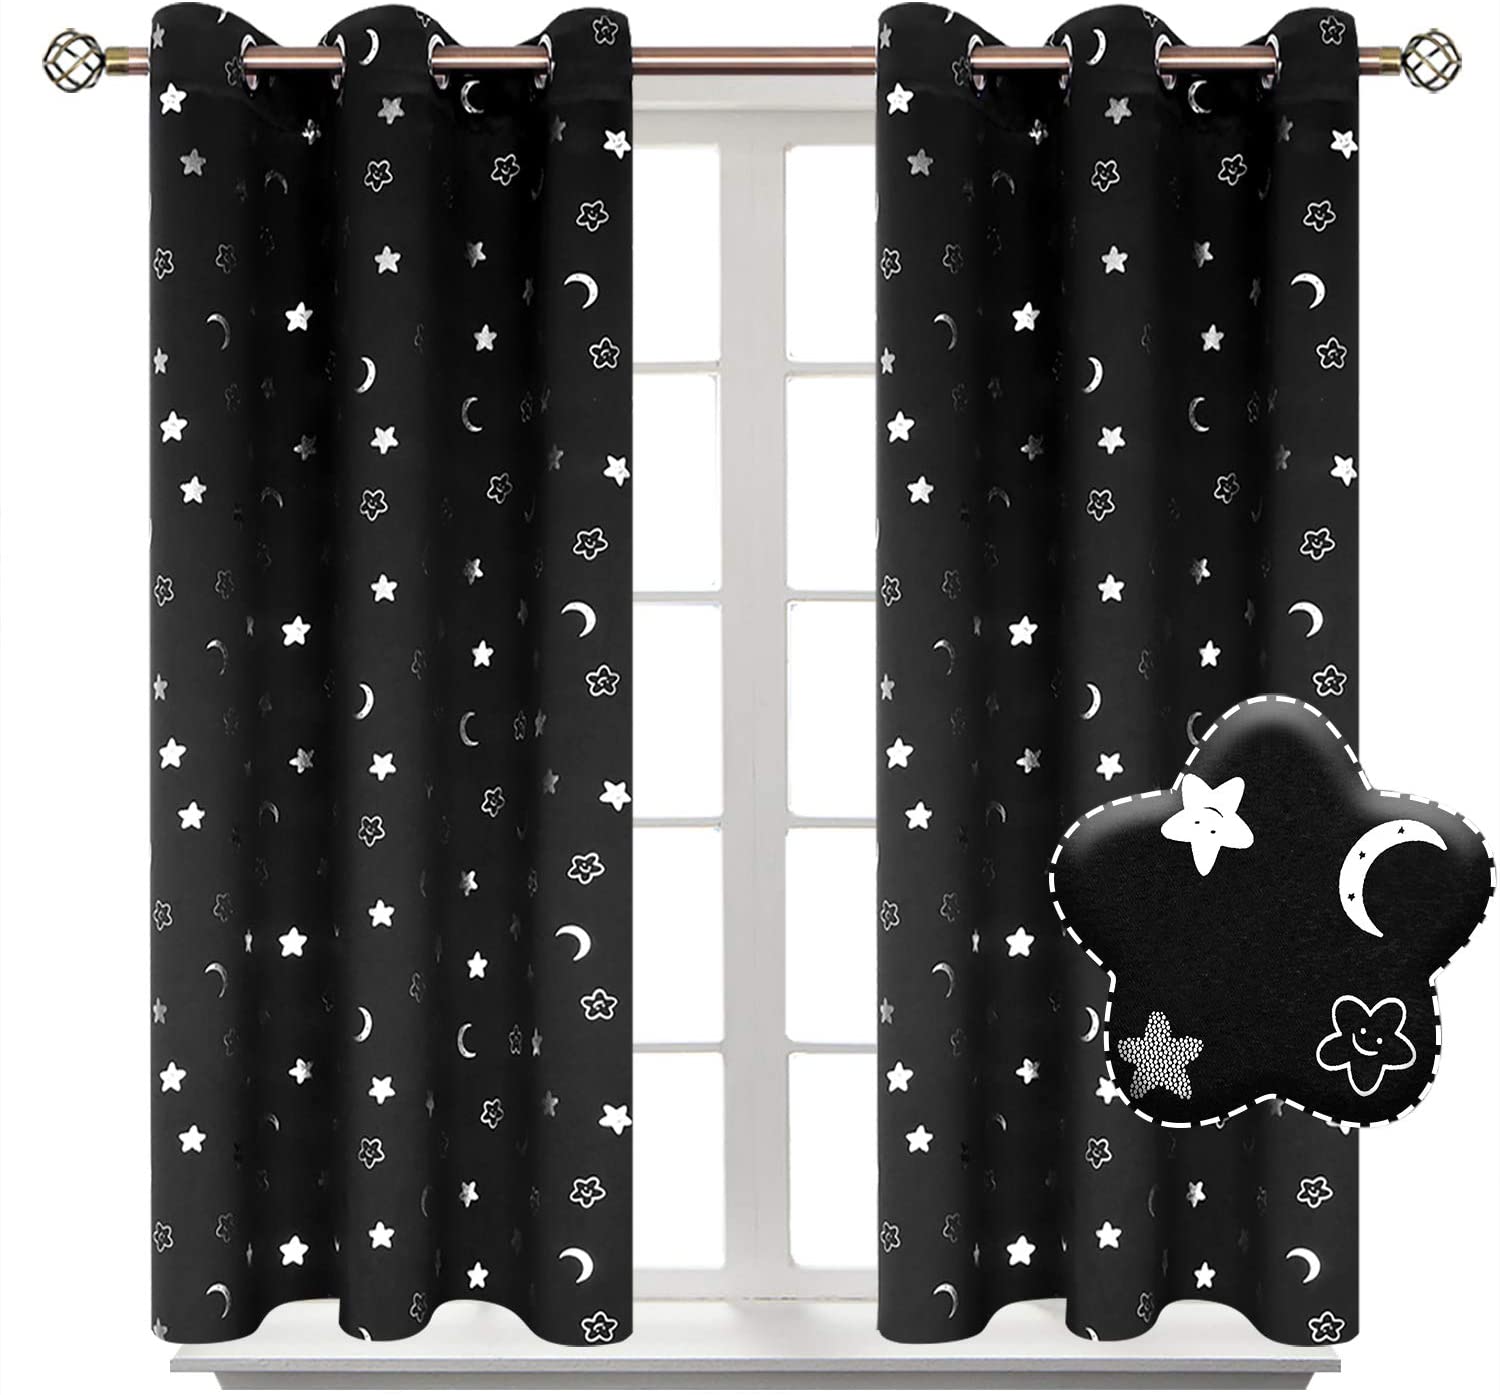 BGment Moon and Stars Blackout Curtains for Kids Bedroom, Grommet Thermal Insula Super zysk